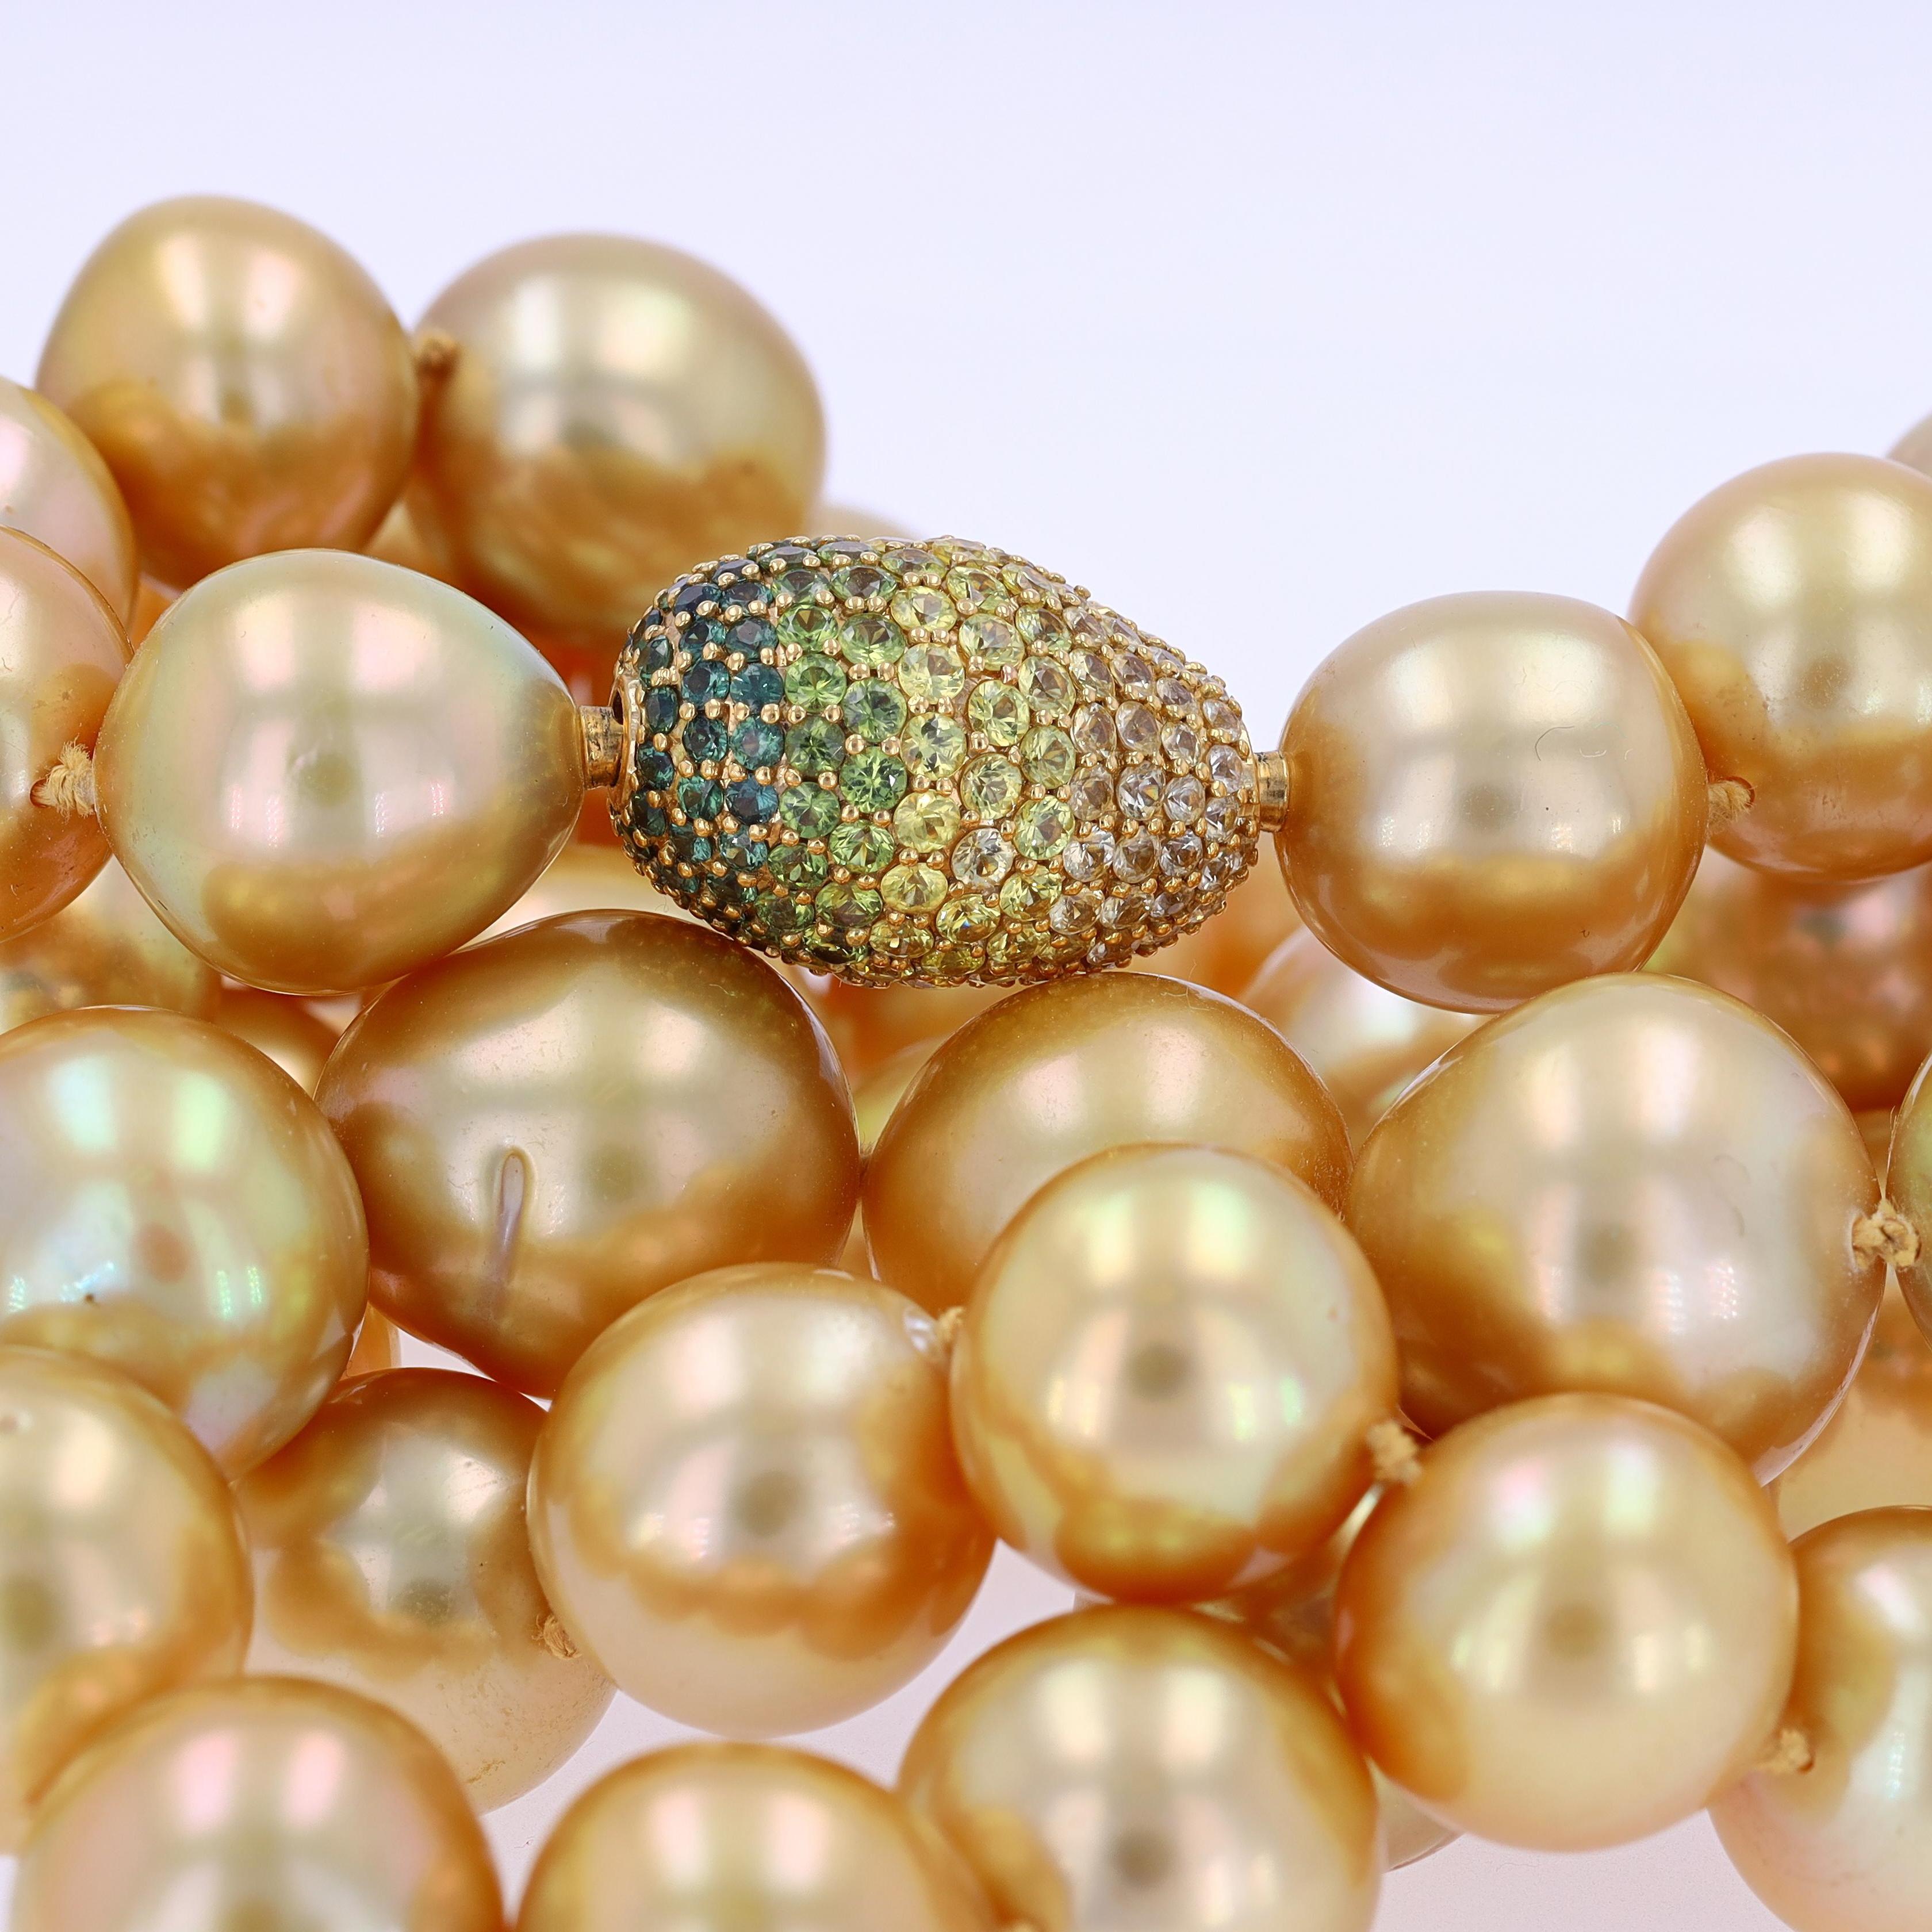 Strand of golden cultured South Sea pearls measuring approximately 15.5 to 12.5 mm, with an ombré green & yellow pavé-set sapphire pebble clasp, mounted in 18K gold. The necklace measures 36.5 inches in length.

Description:
These pearls are golden